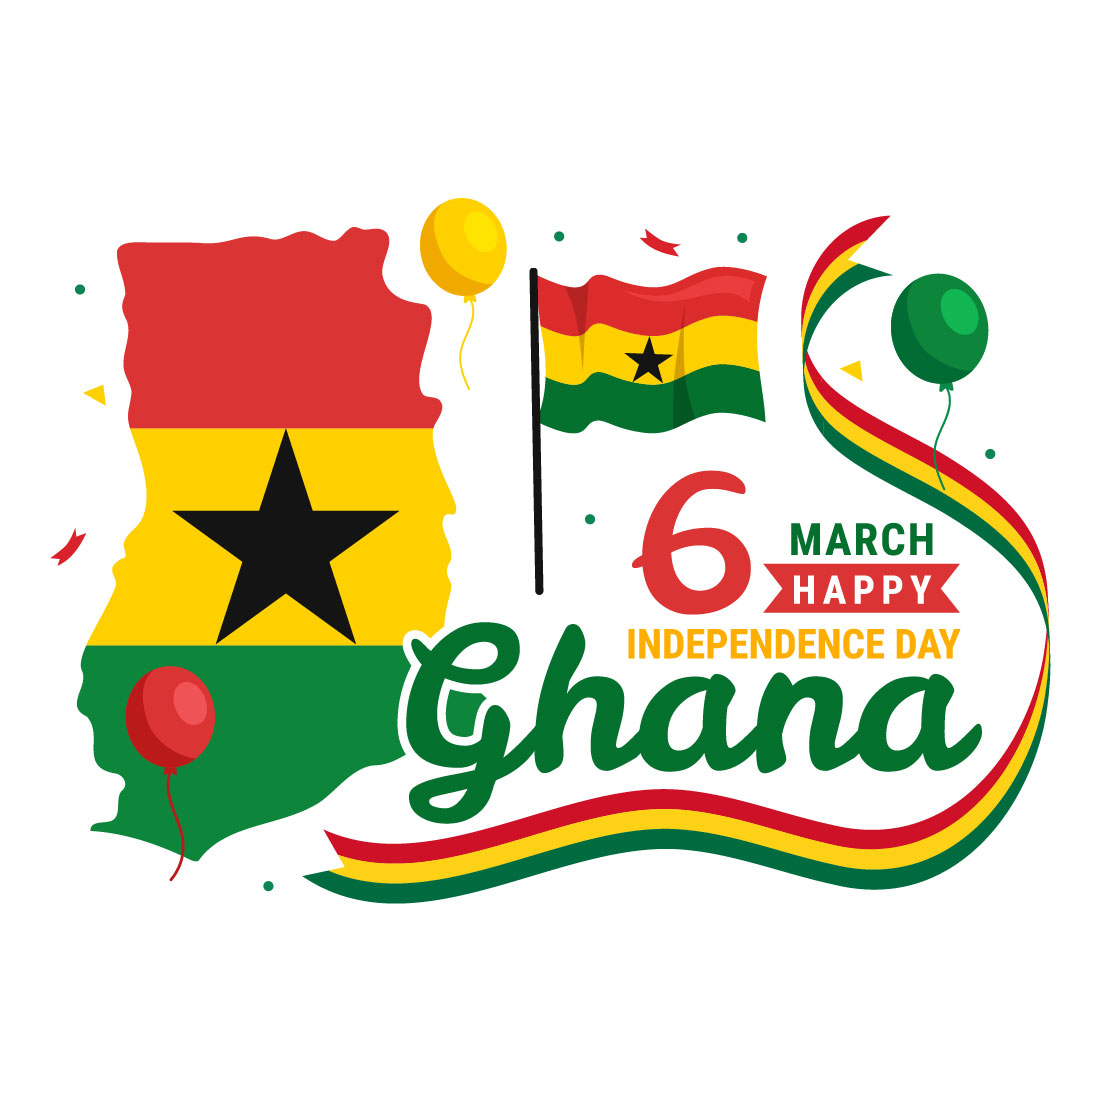 13 Ghana Independence Day Illustration cover image.